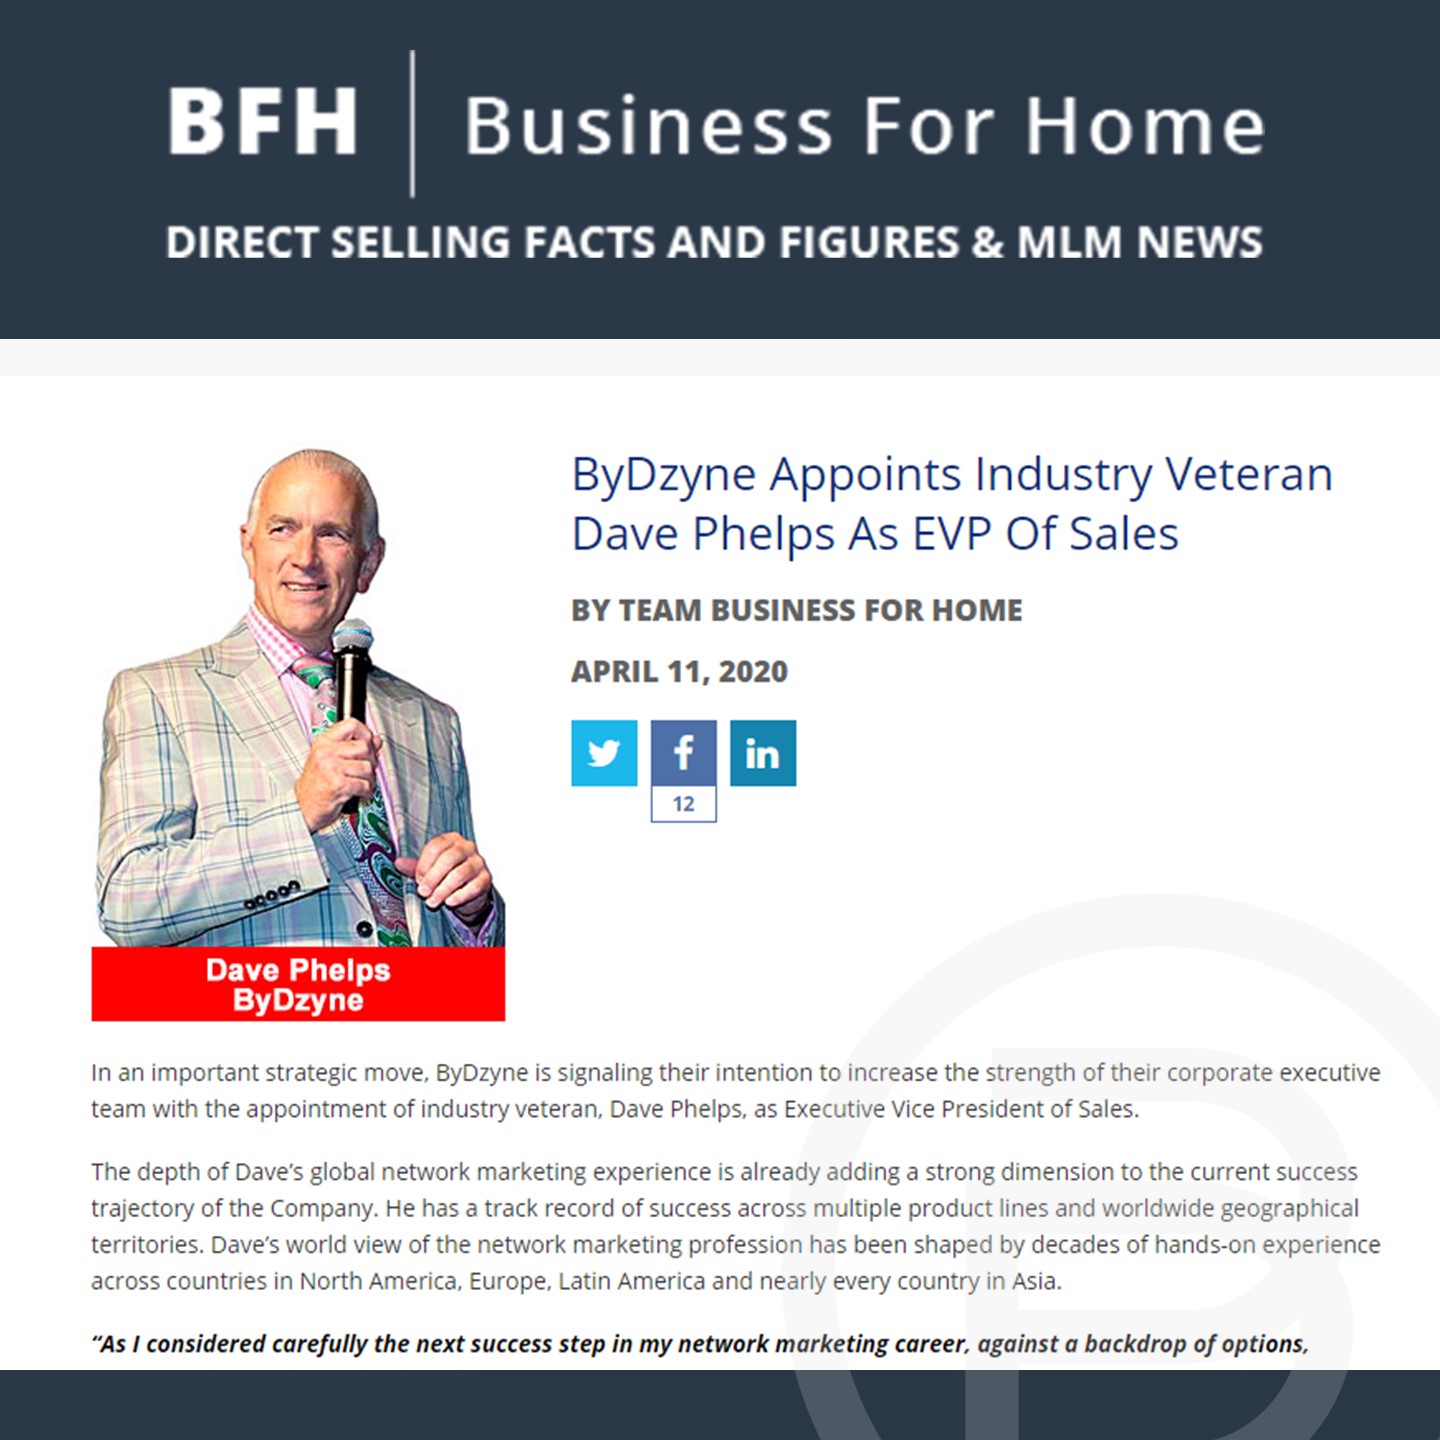 BFH: ByDzyne Appoints Industry Veteran Dave Phelps As EVP Of Sales